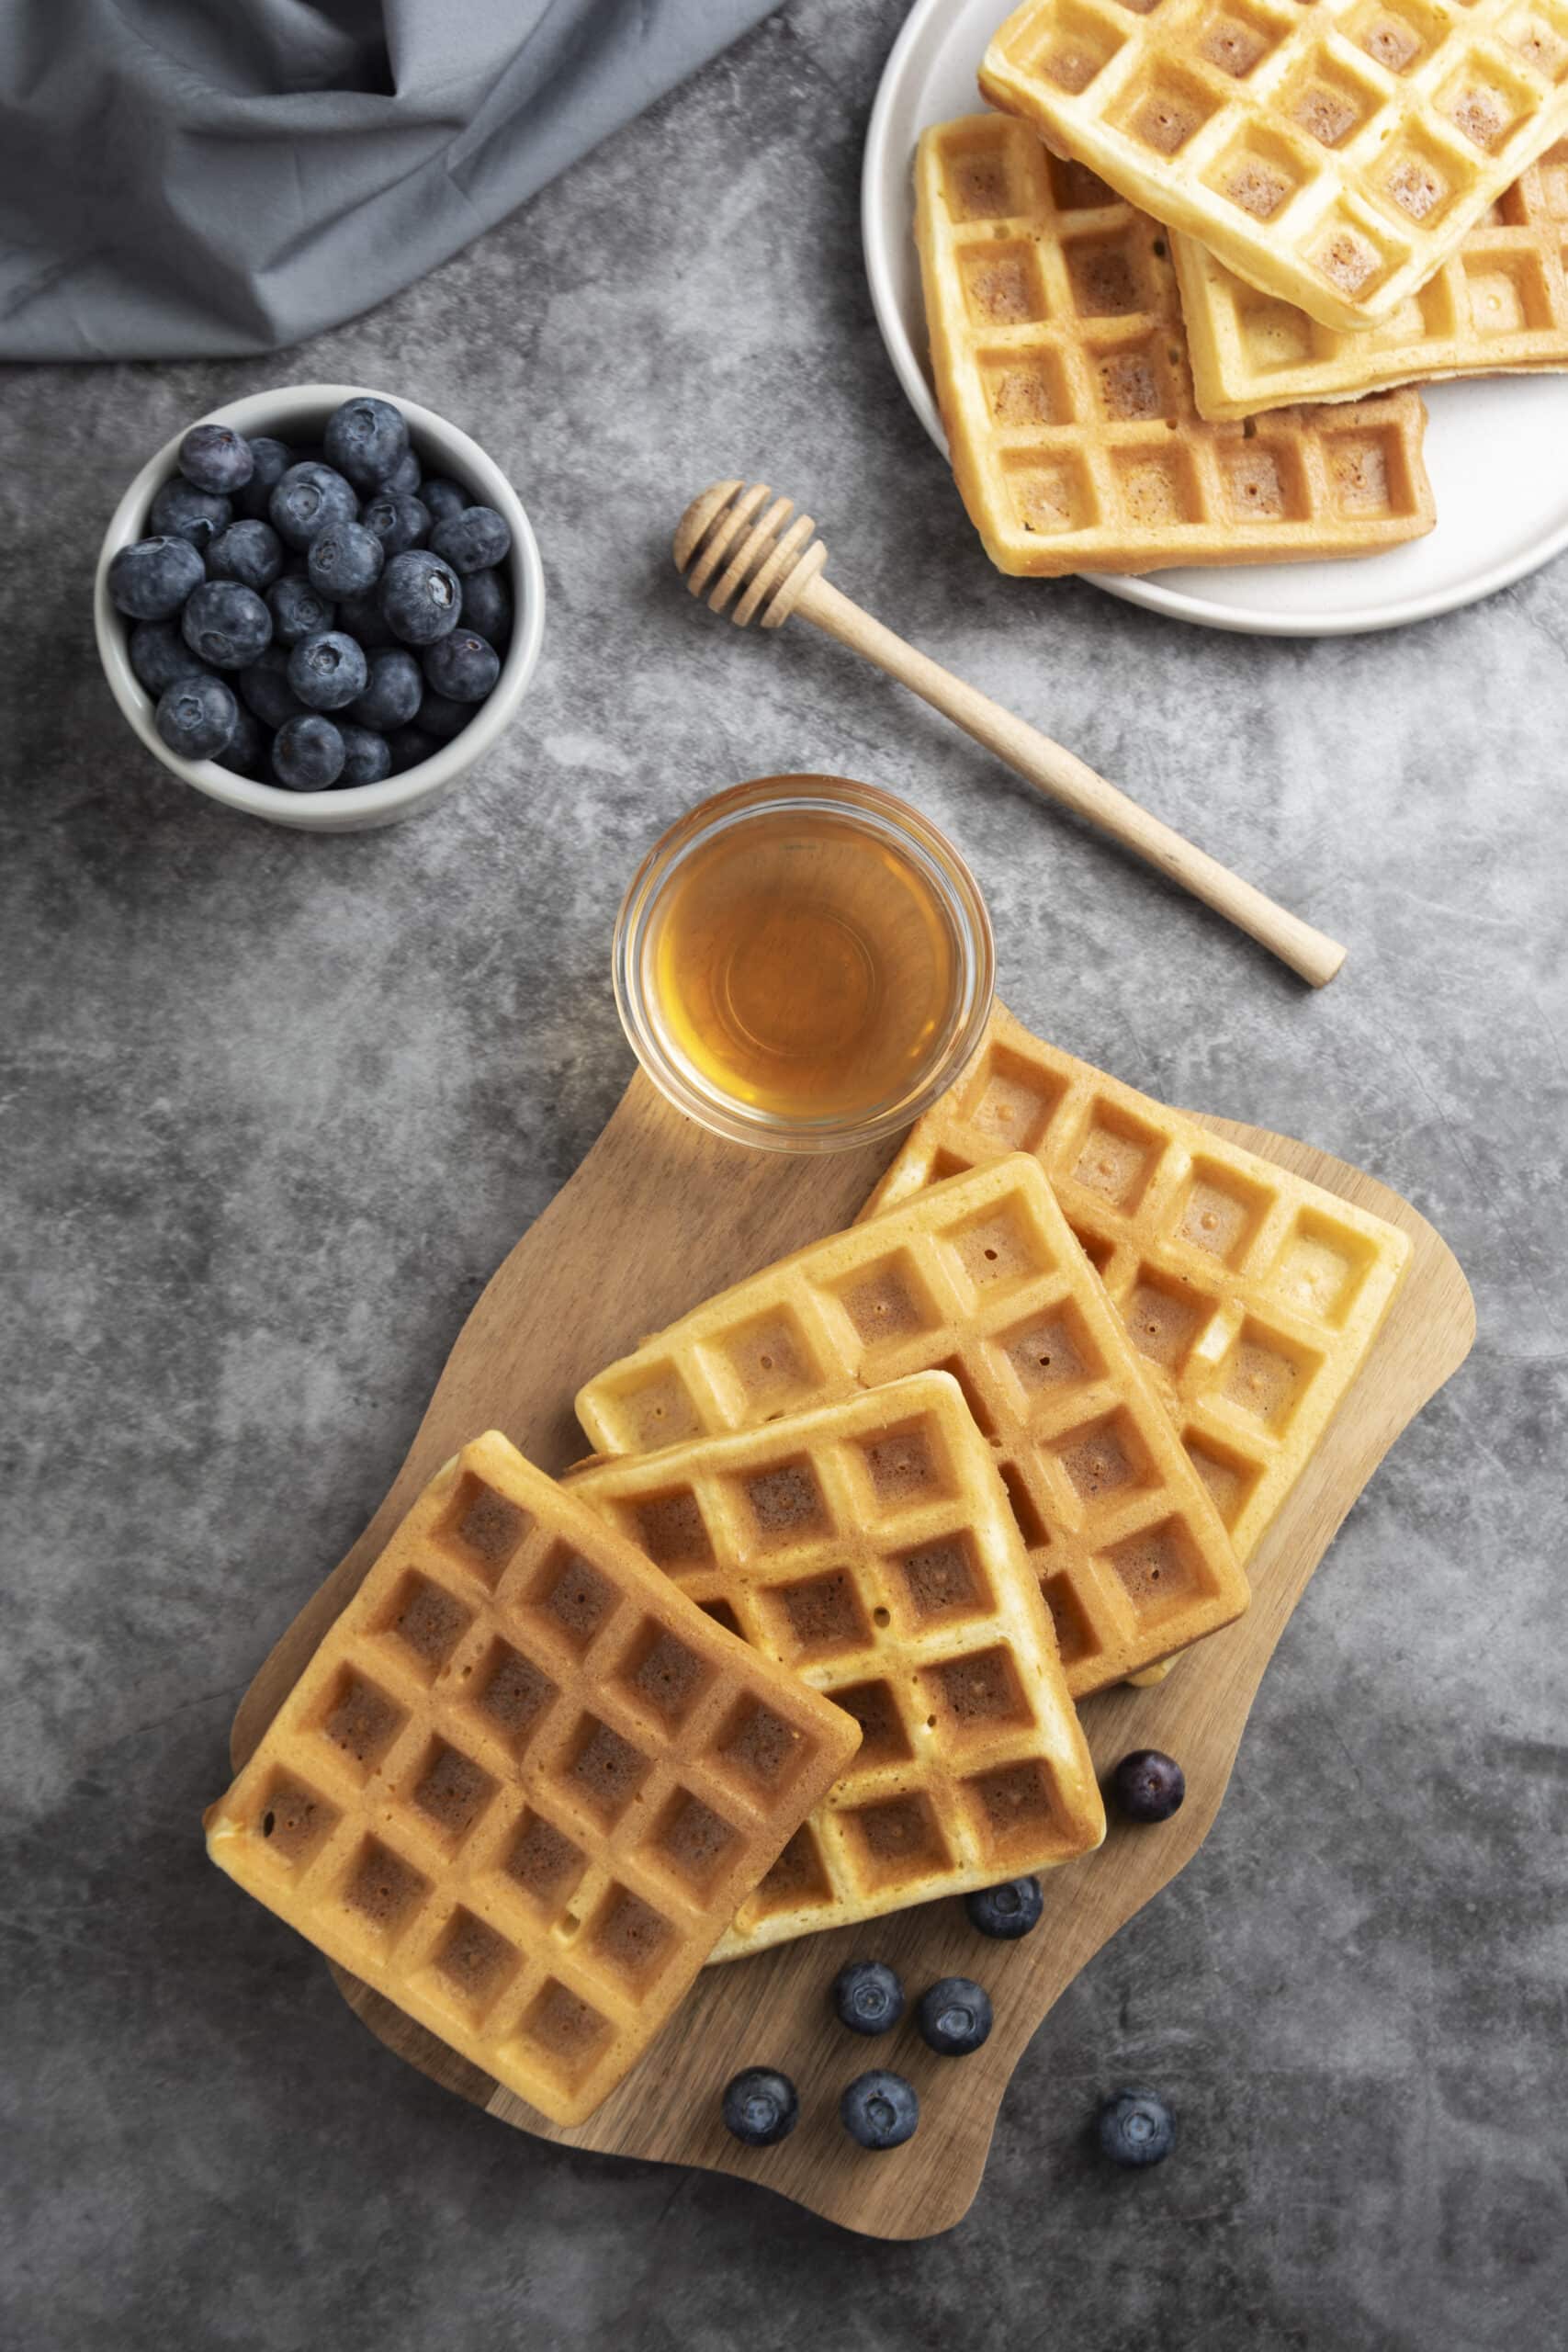 Substitute For Vegetable Oil In Waffles